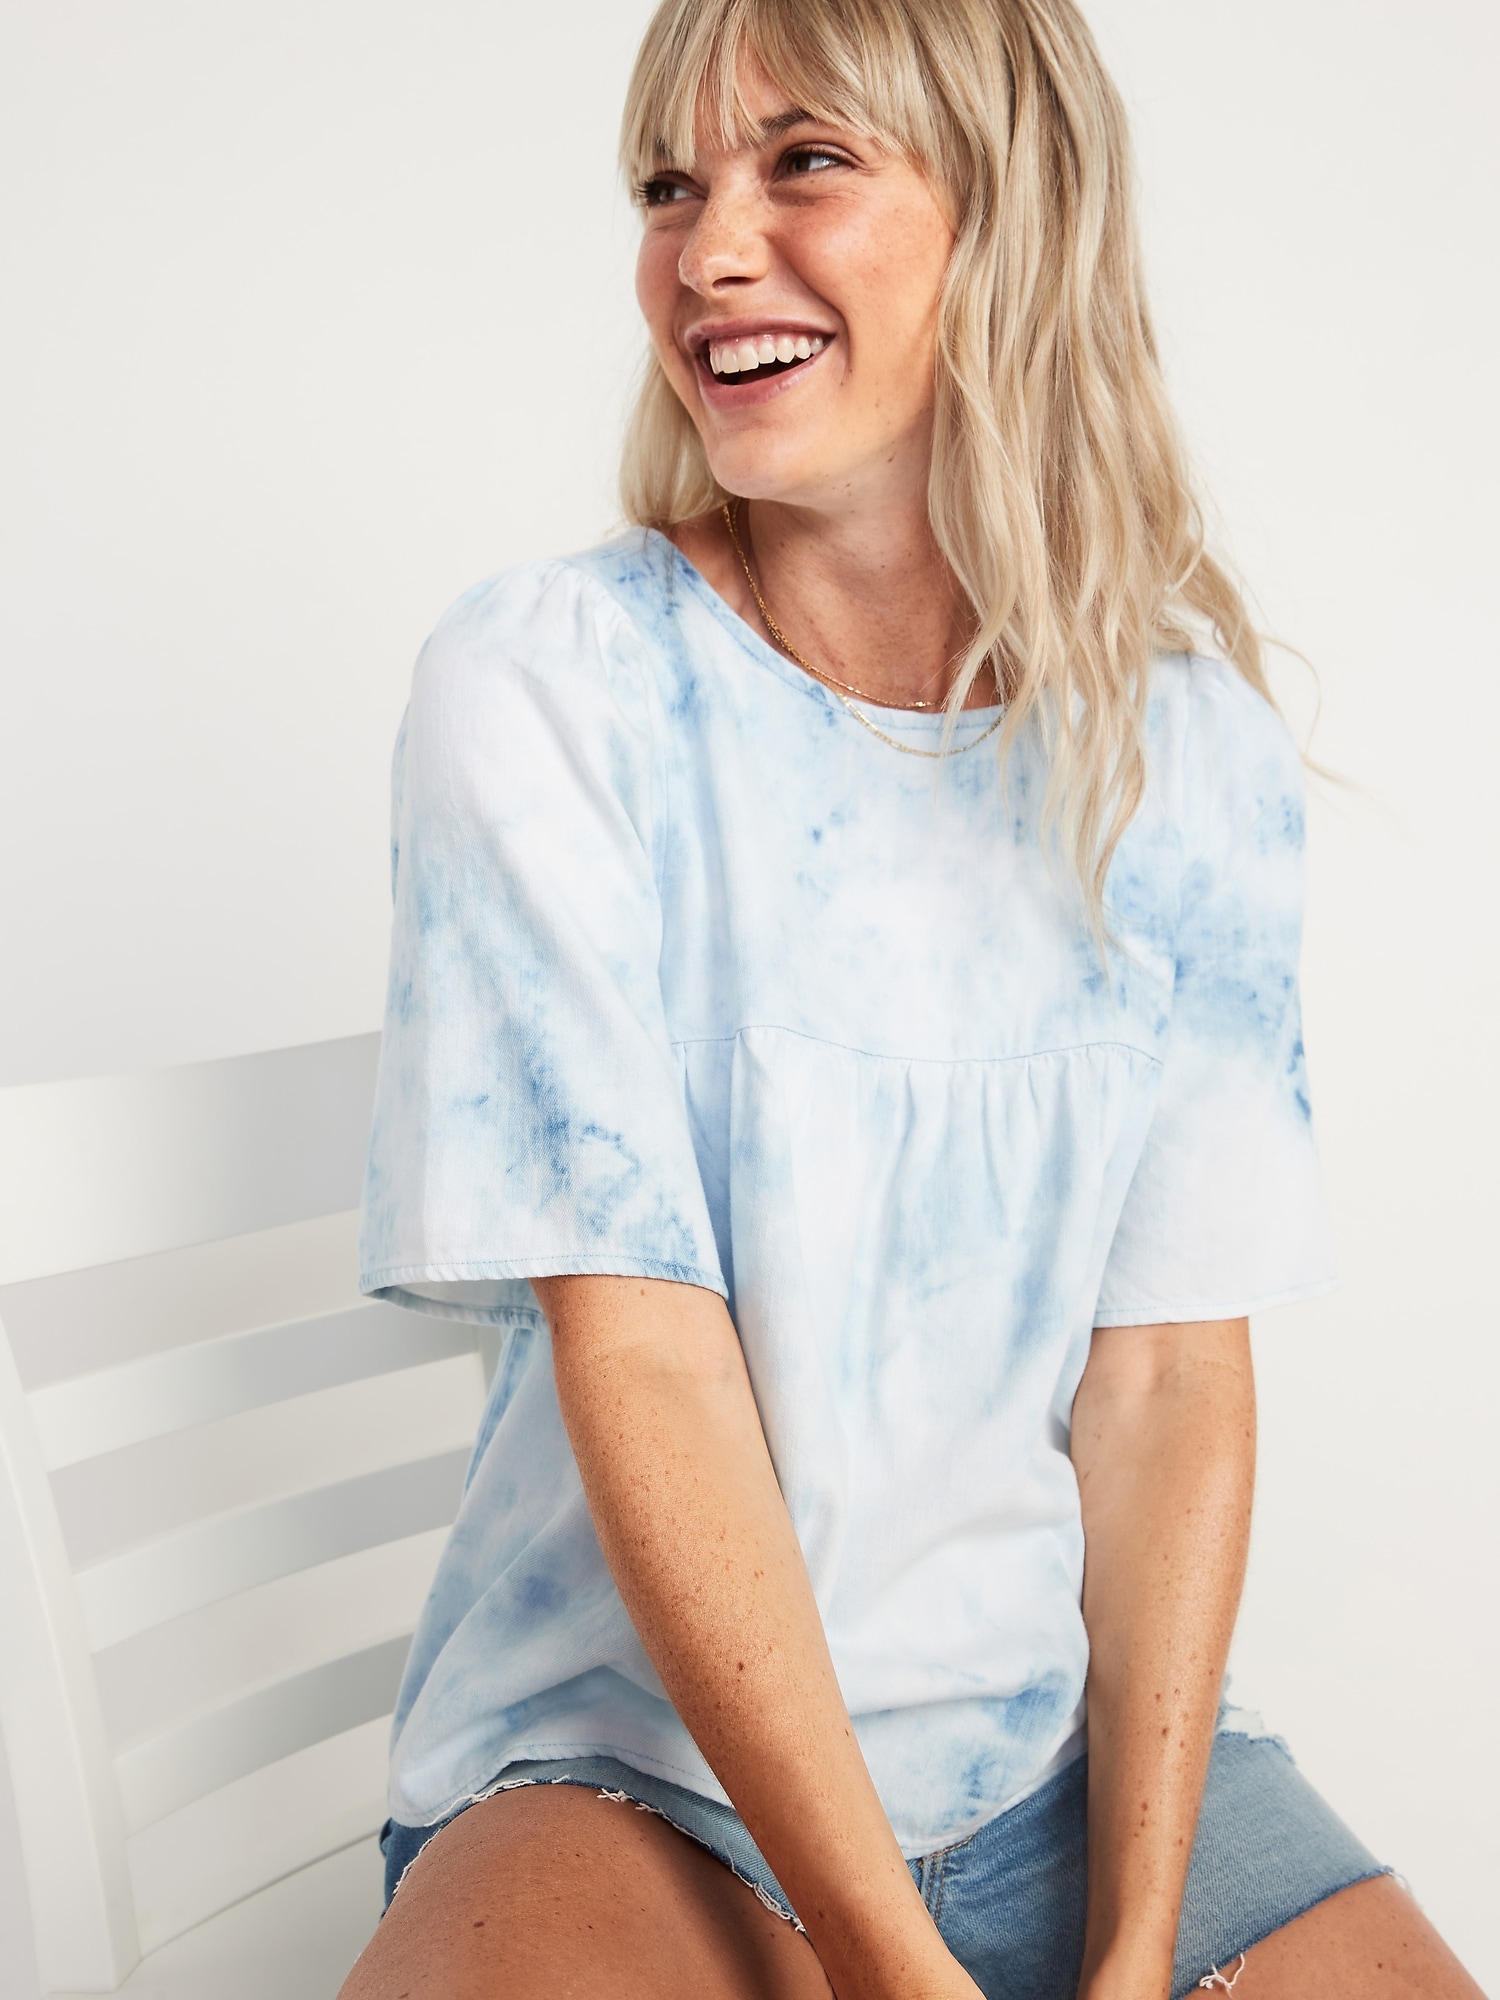 Oversized Tie-Dyed Jean Top for Women